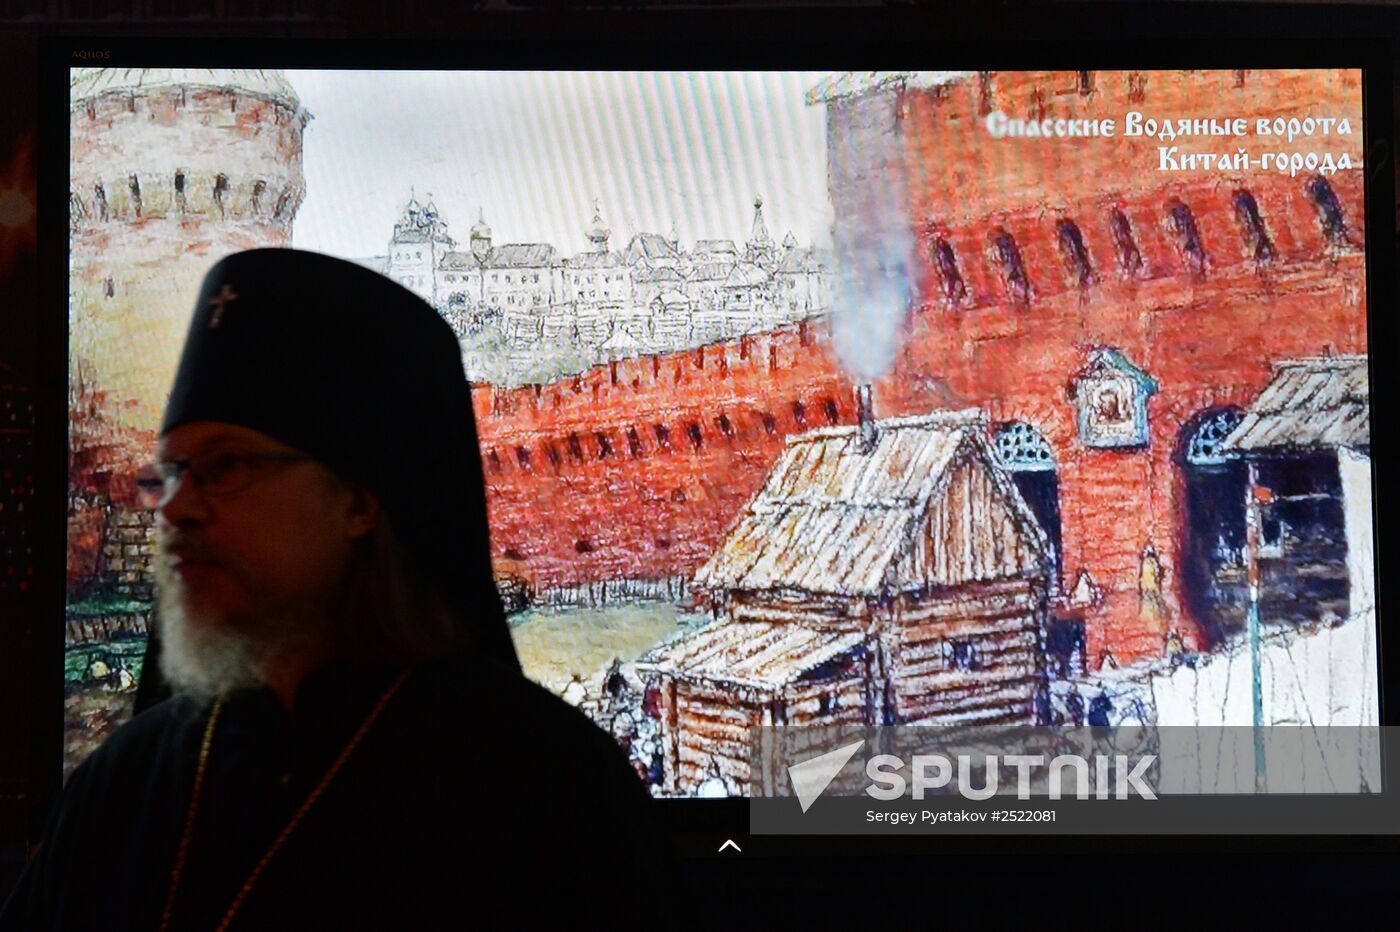 Opening of 13th exhibition-forum "Orthodox Russia. My History. The Rurik Dynasy"